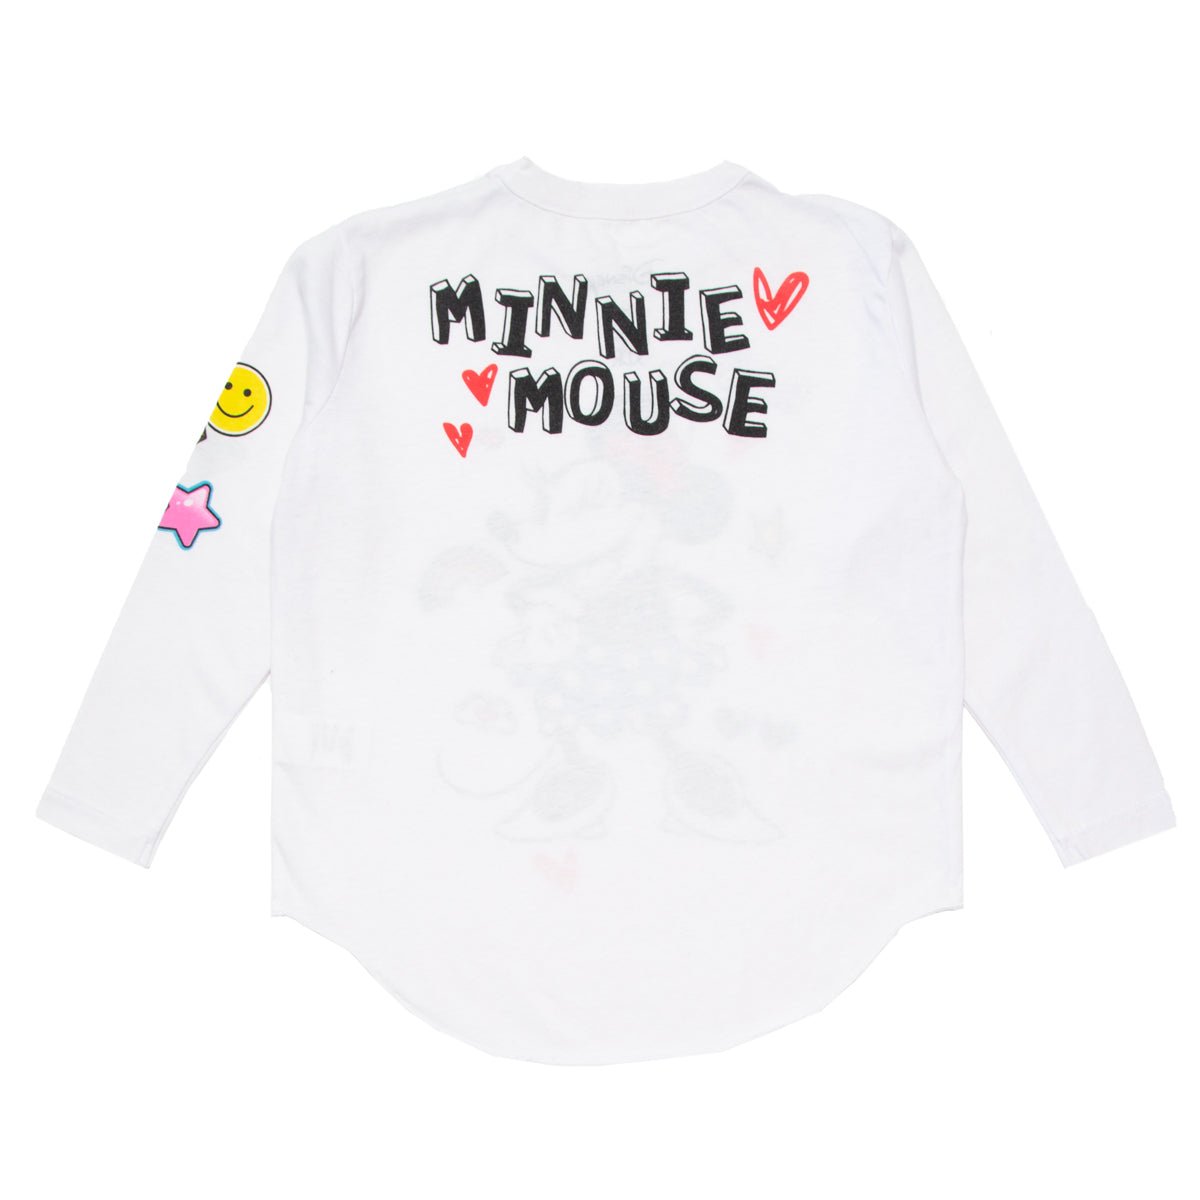 MINNIE MOUSE SMILES LONG SLEEVE TSHIRT - LONG SLEEVE TOPS